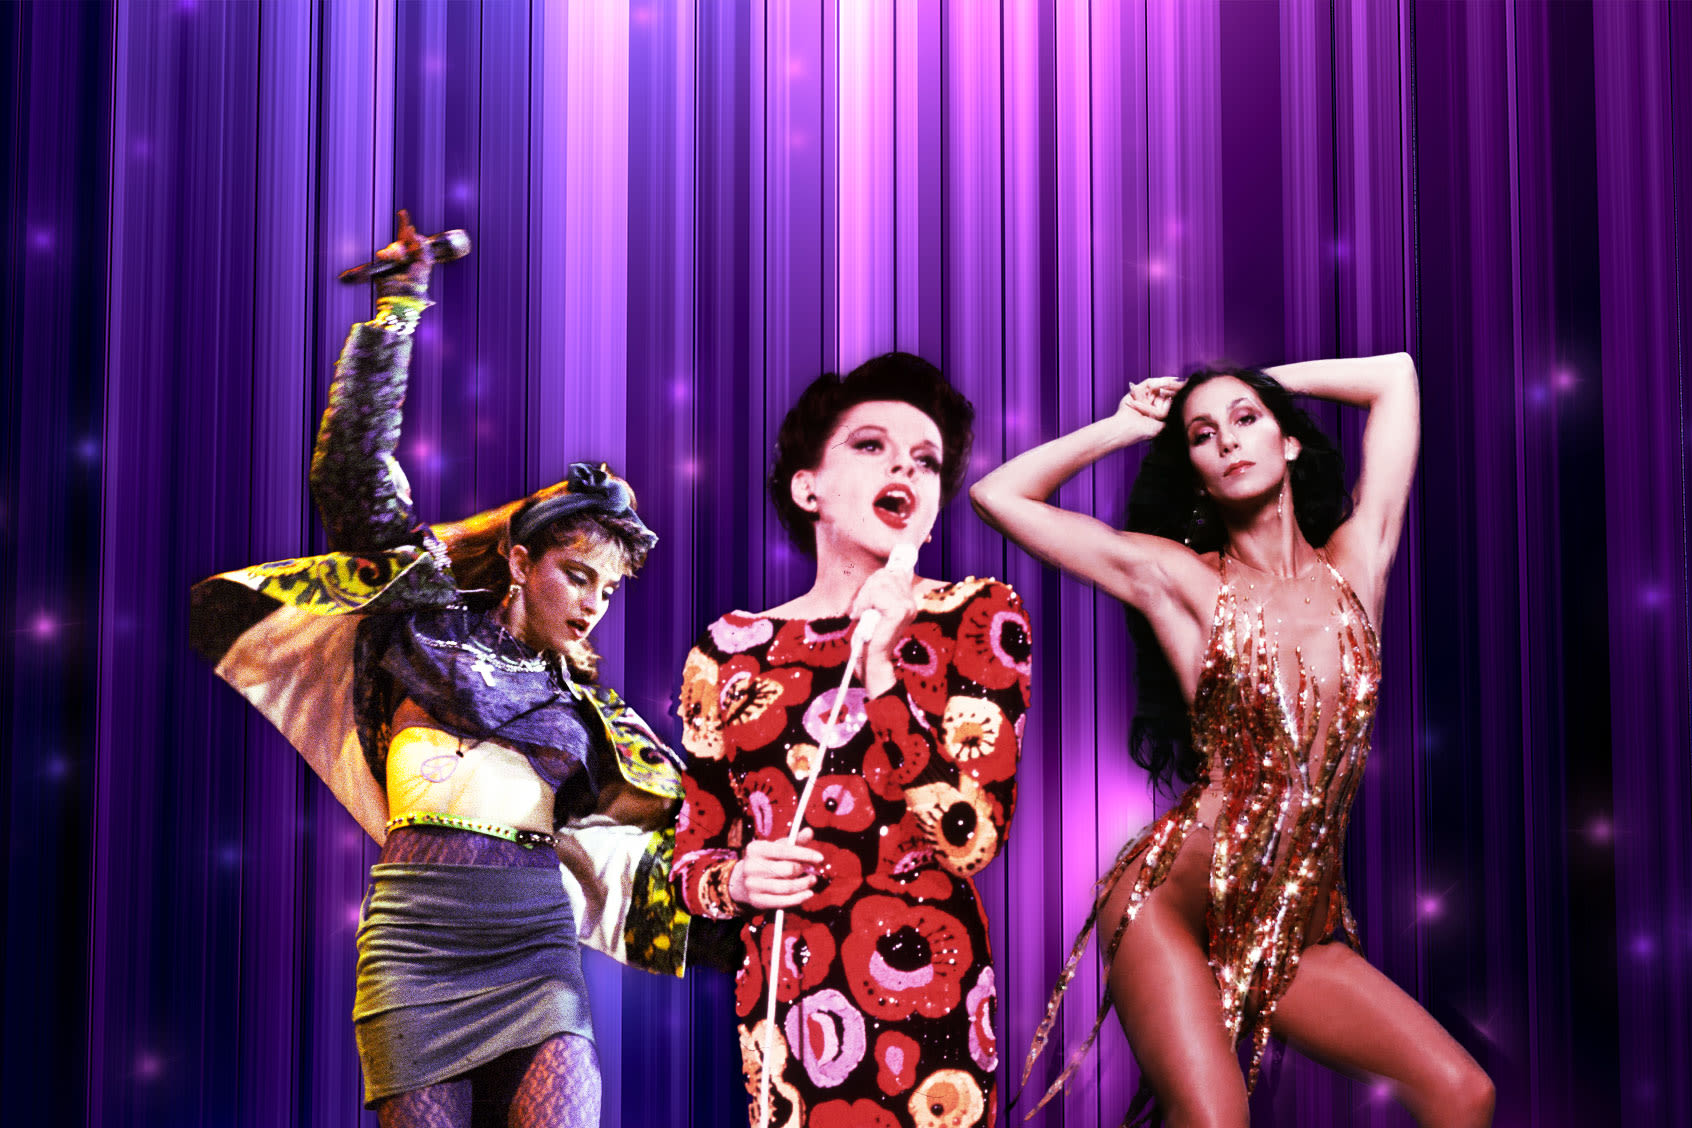 Slaying the charts: The evolution of drag anthems, from Judy Garland to Madonna and beyond